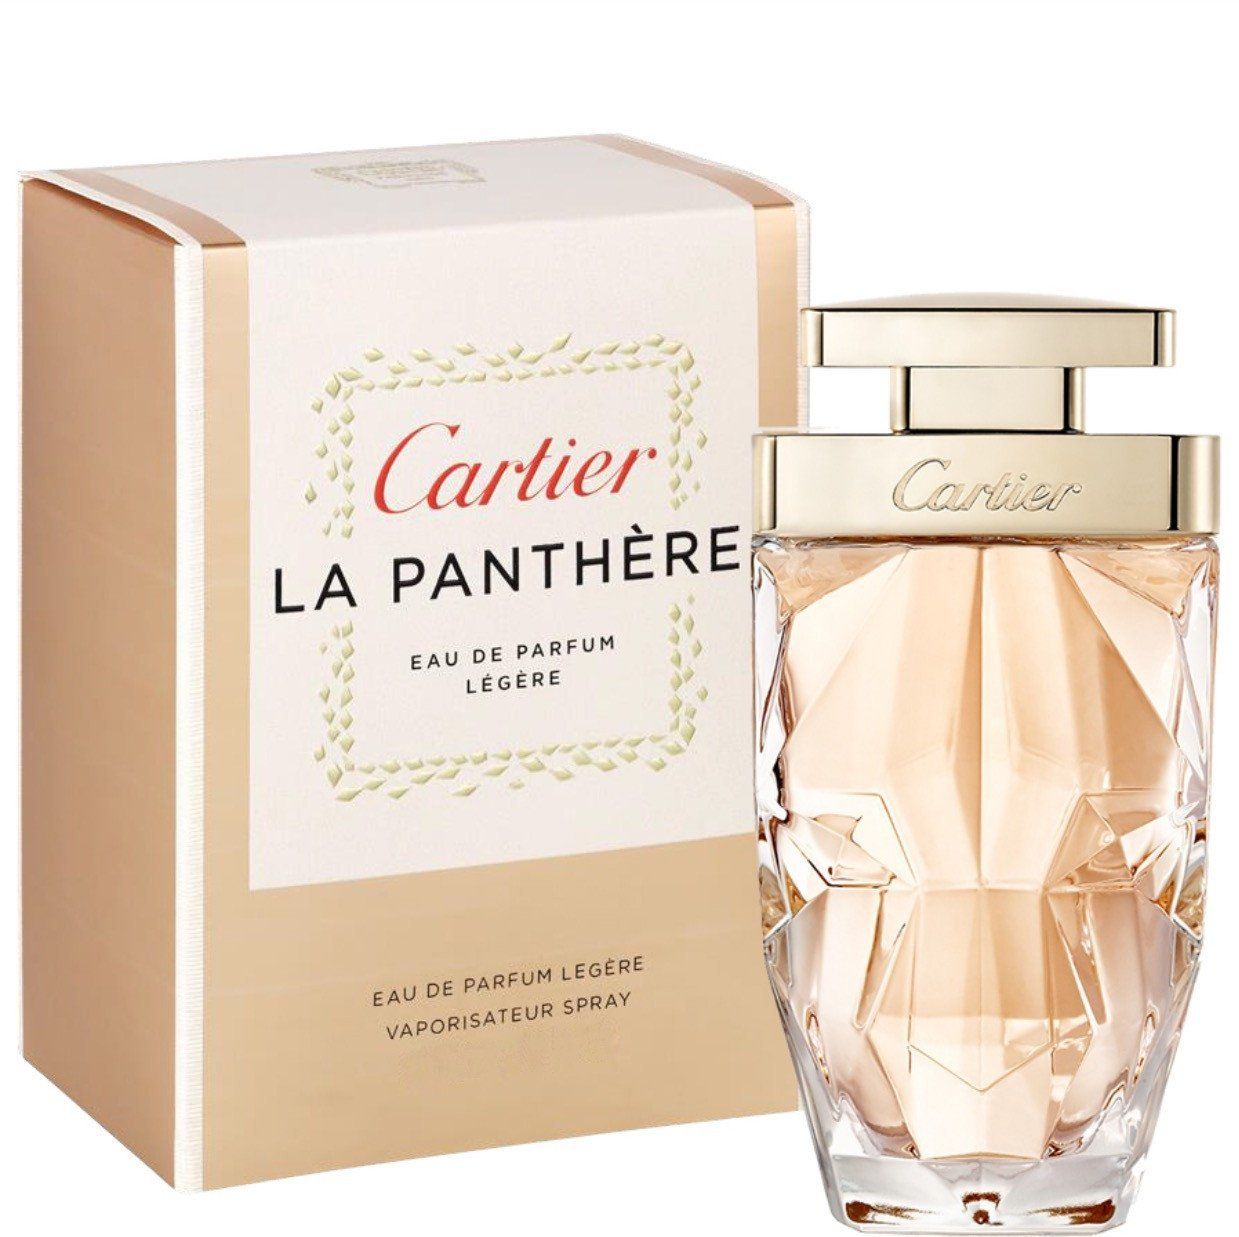 Introduced in 2015. Cartier launched La Panth̬re, a sensual and bold floral-chypre fragrance that has that vibe of the classics of this category, in the spring of 2014. A year after, a new version of the fragrance La Panth̬re Leger is launching. The line is dedicated to free and passionate women.<br><br>This enchanting "feline" floral fragrance combines sparkling notes of gardenia flower with velvety tones of musk. La Panth̬re L̩g̬re version reveals a new aspect of the original chypre-gardenia-musk composition. The composition is "illuminated" with a new ingredient of tiare flower.The nose behind this fragrance is Mathilde Laurent.<br><br><iframe width="560" height="315" src="https://www.youtube.com/embed/lRdFQLZnH6Y" frameborder="0" allowfullscreen></iframe>